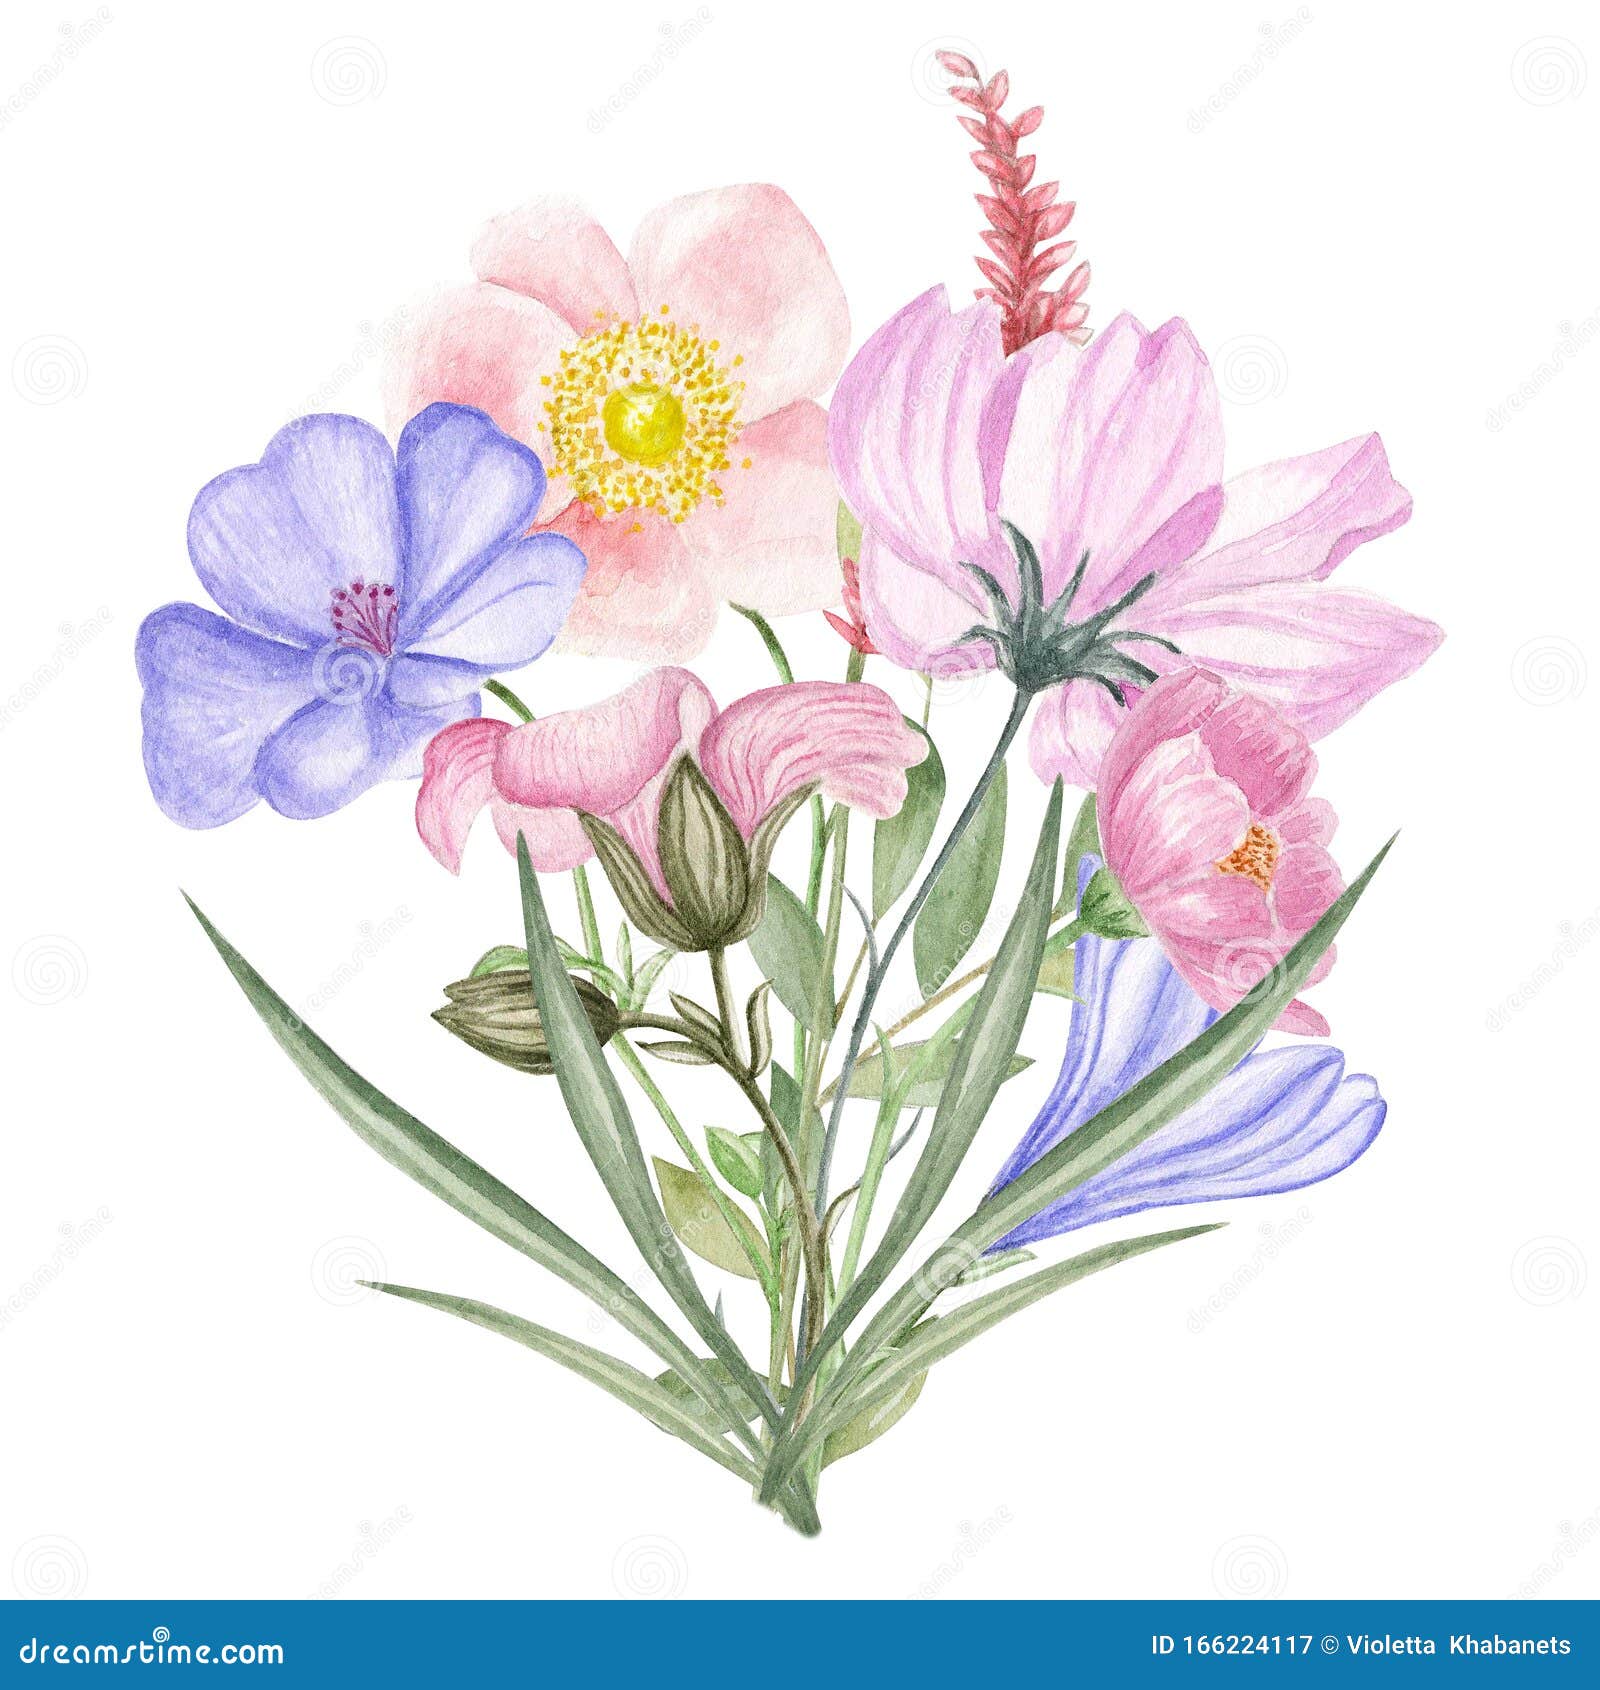 Watercolor Illustration of a Wreath of Wildflowers. Stock Illustration ...